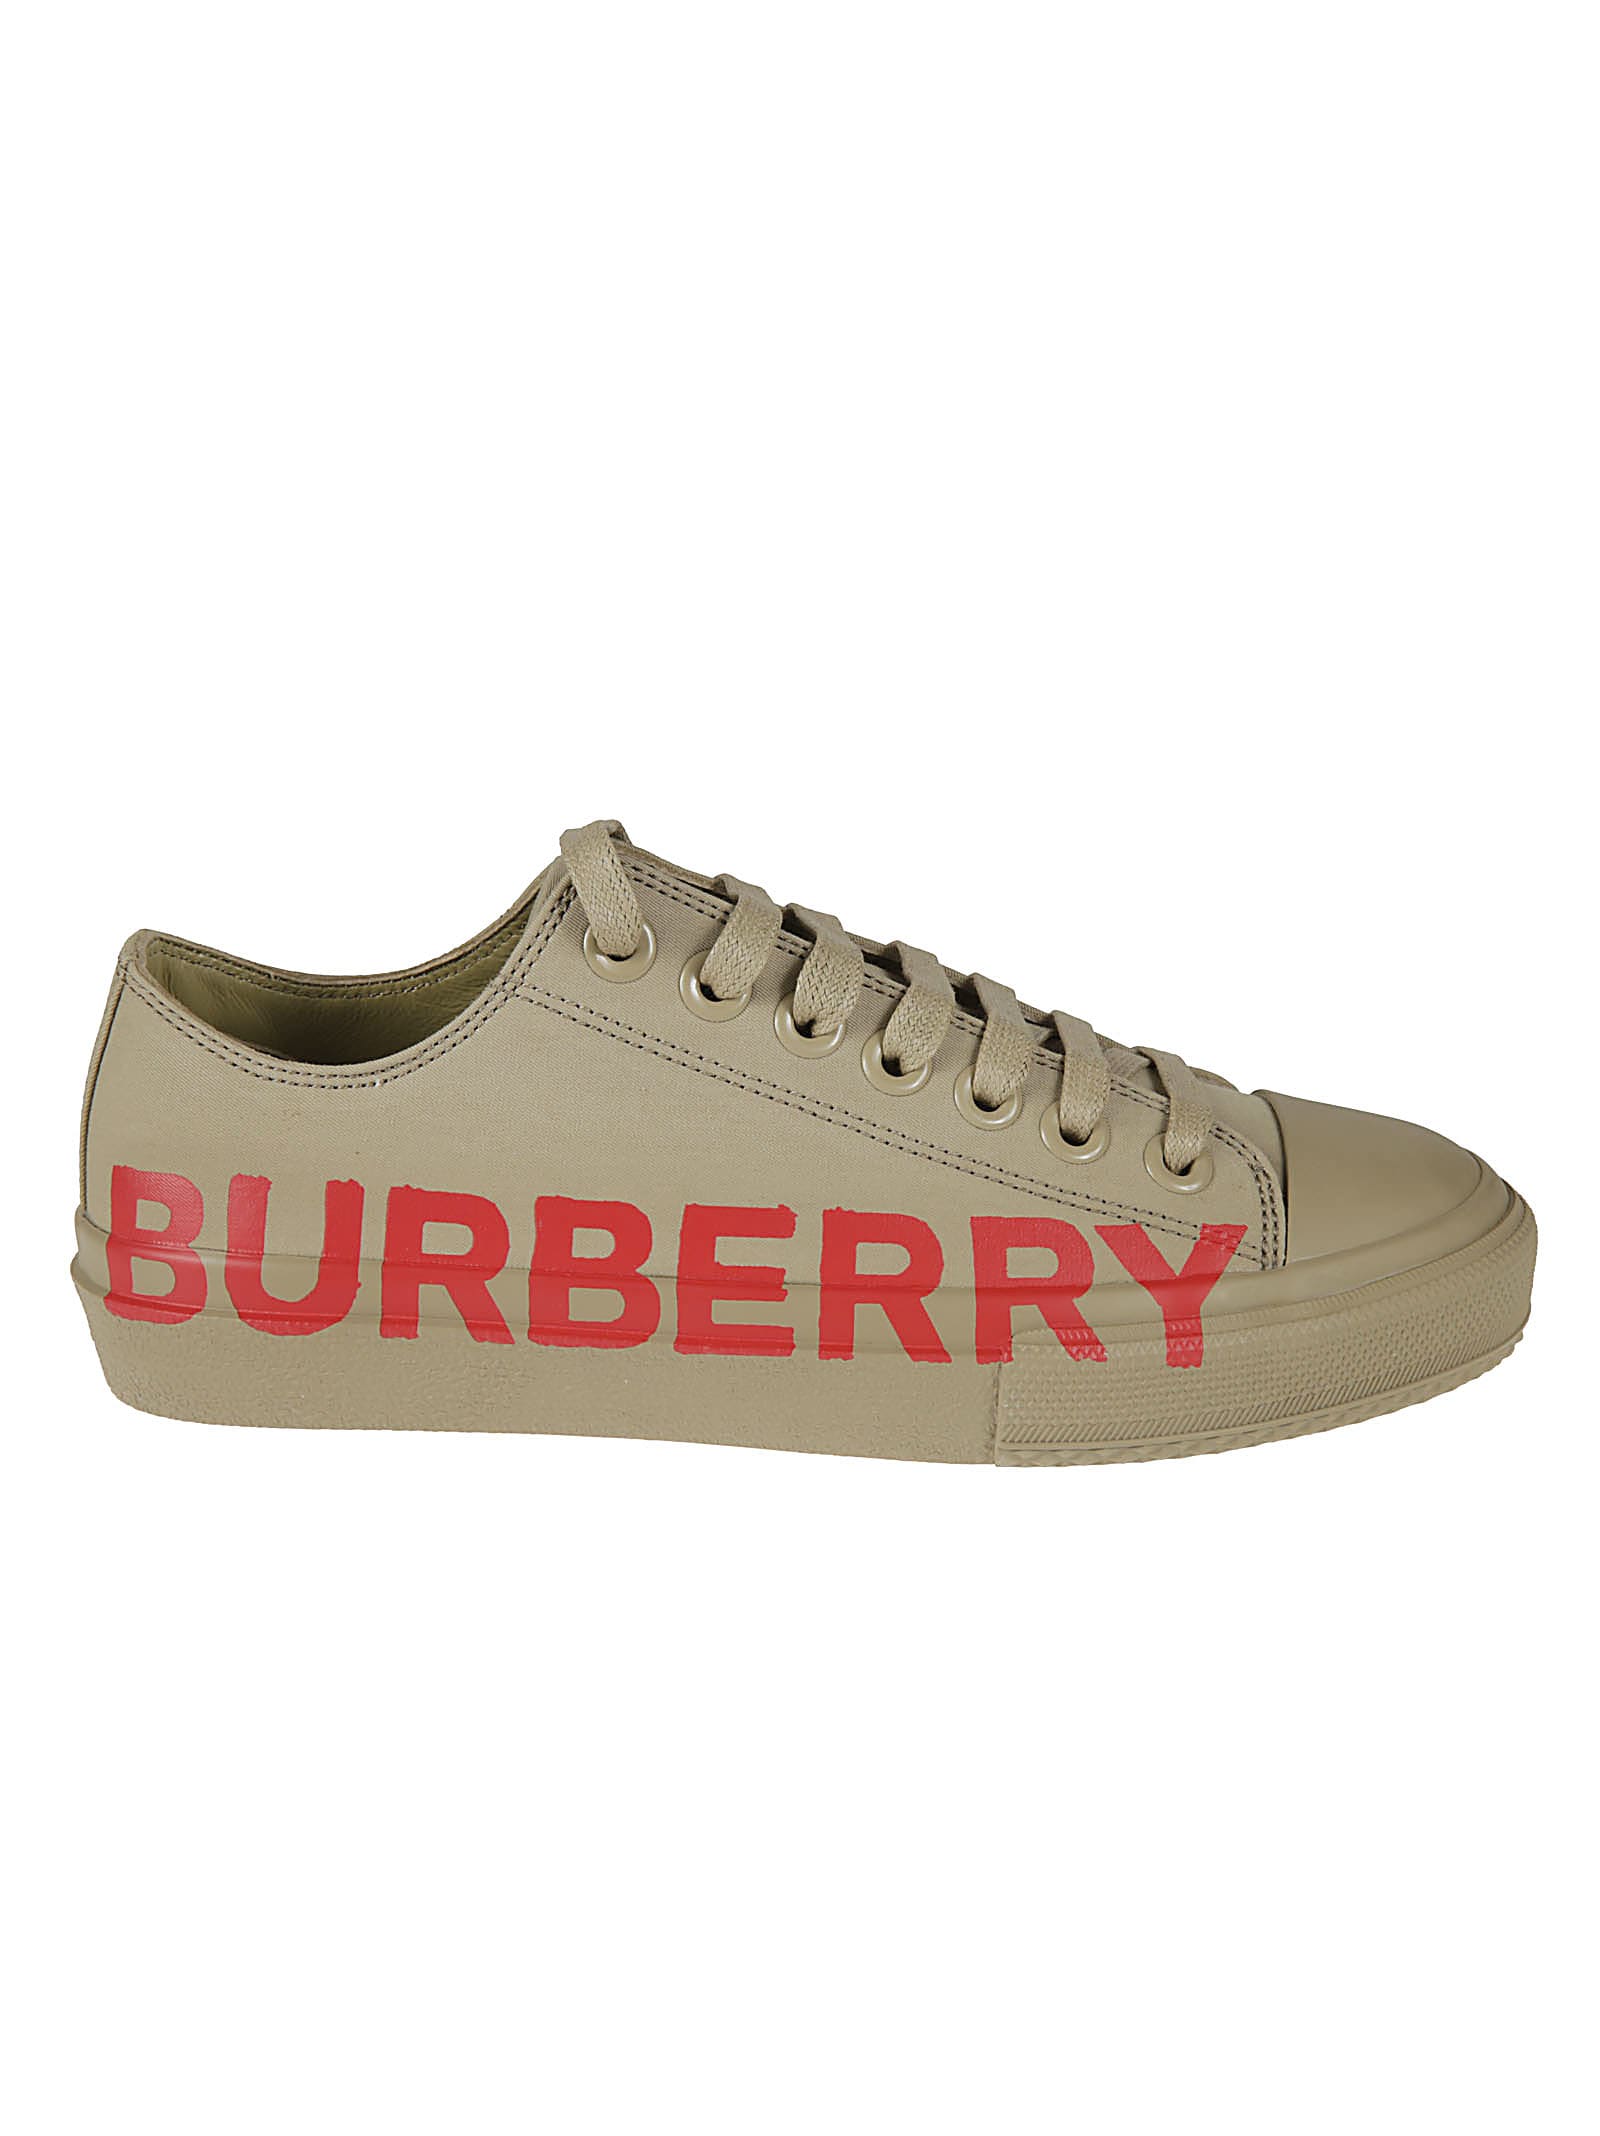 Buy Burberry Larkhall Low Sneakers online, shop Burberry shoes with free shipping